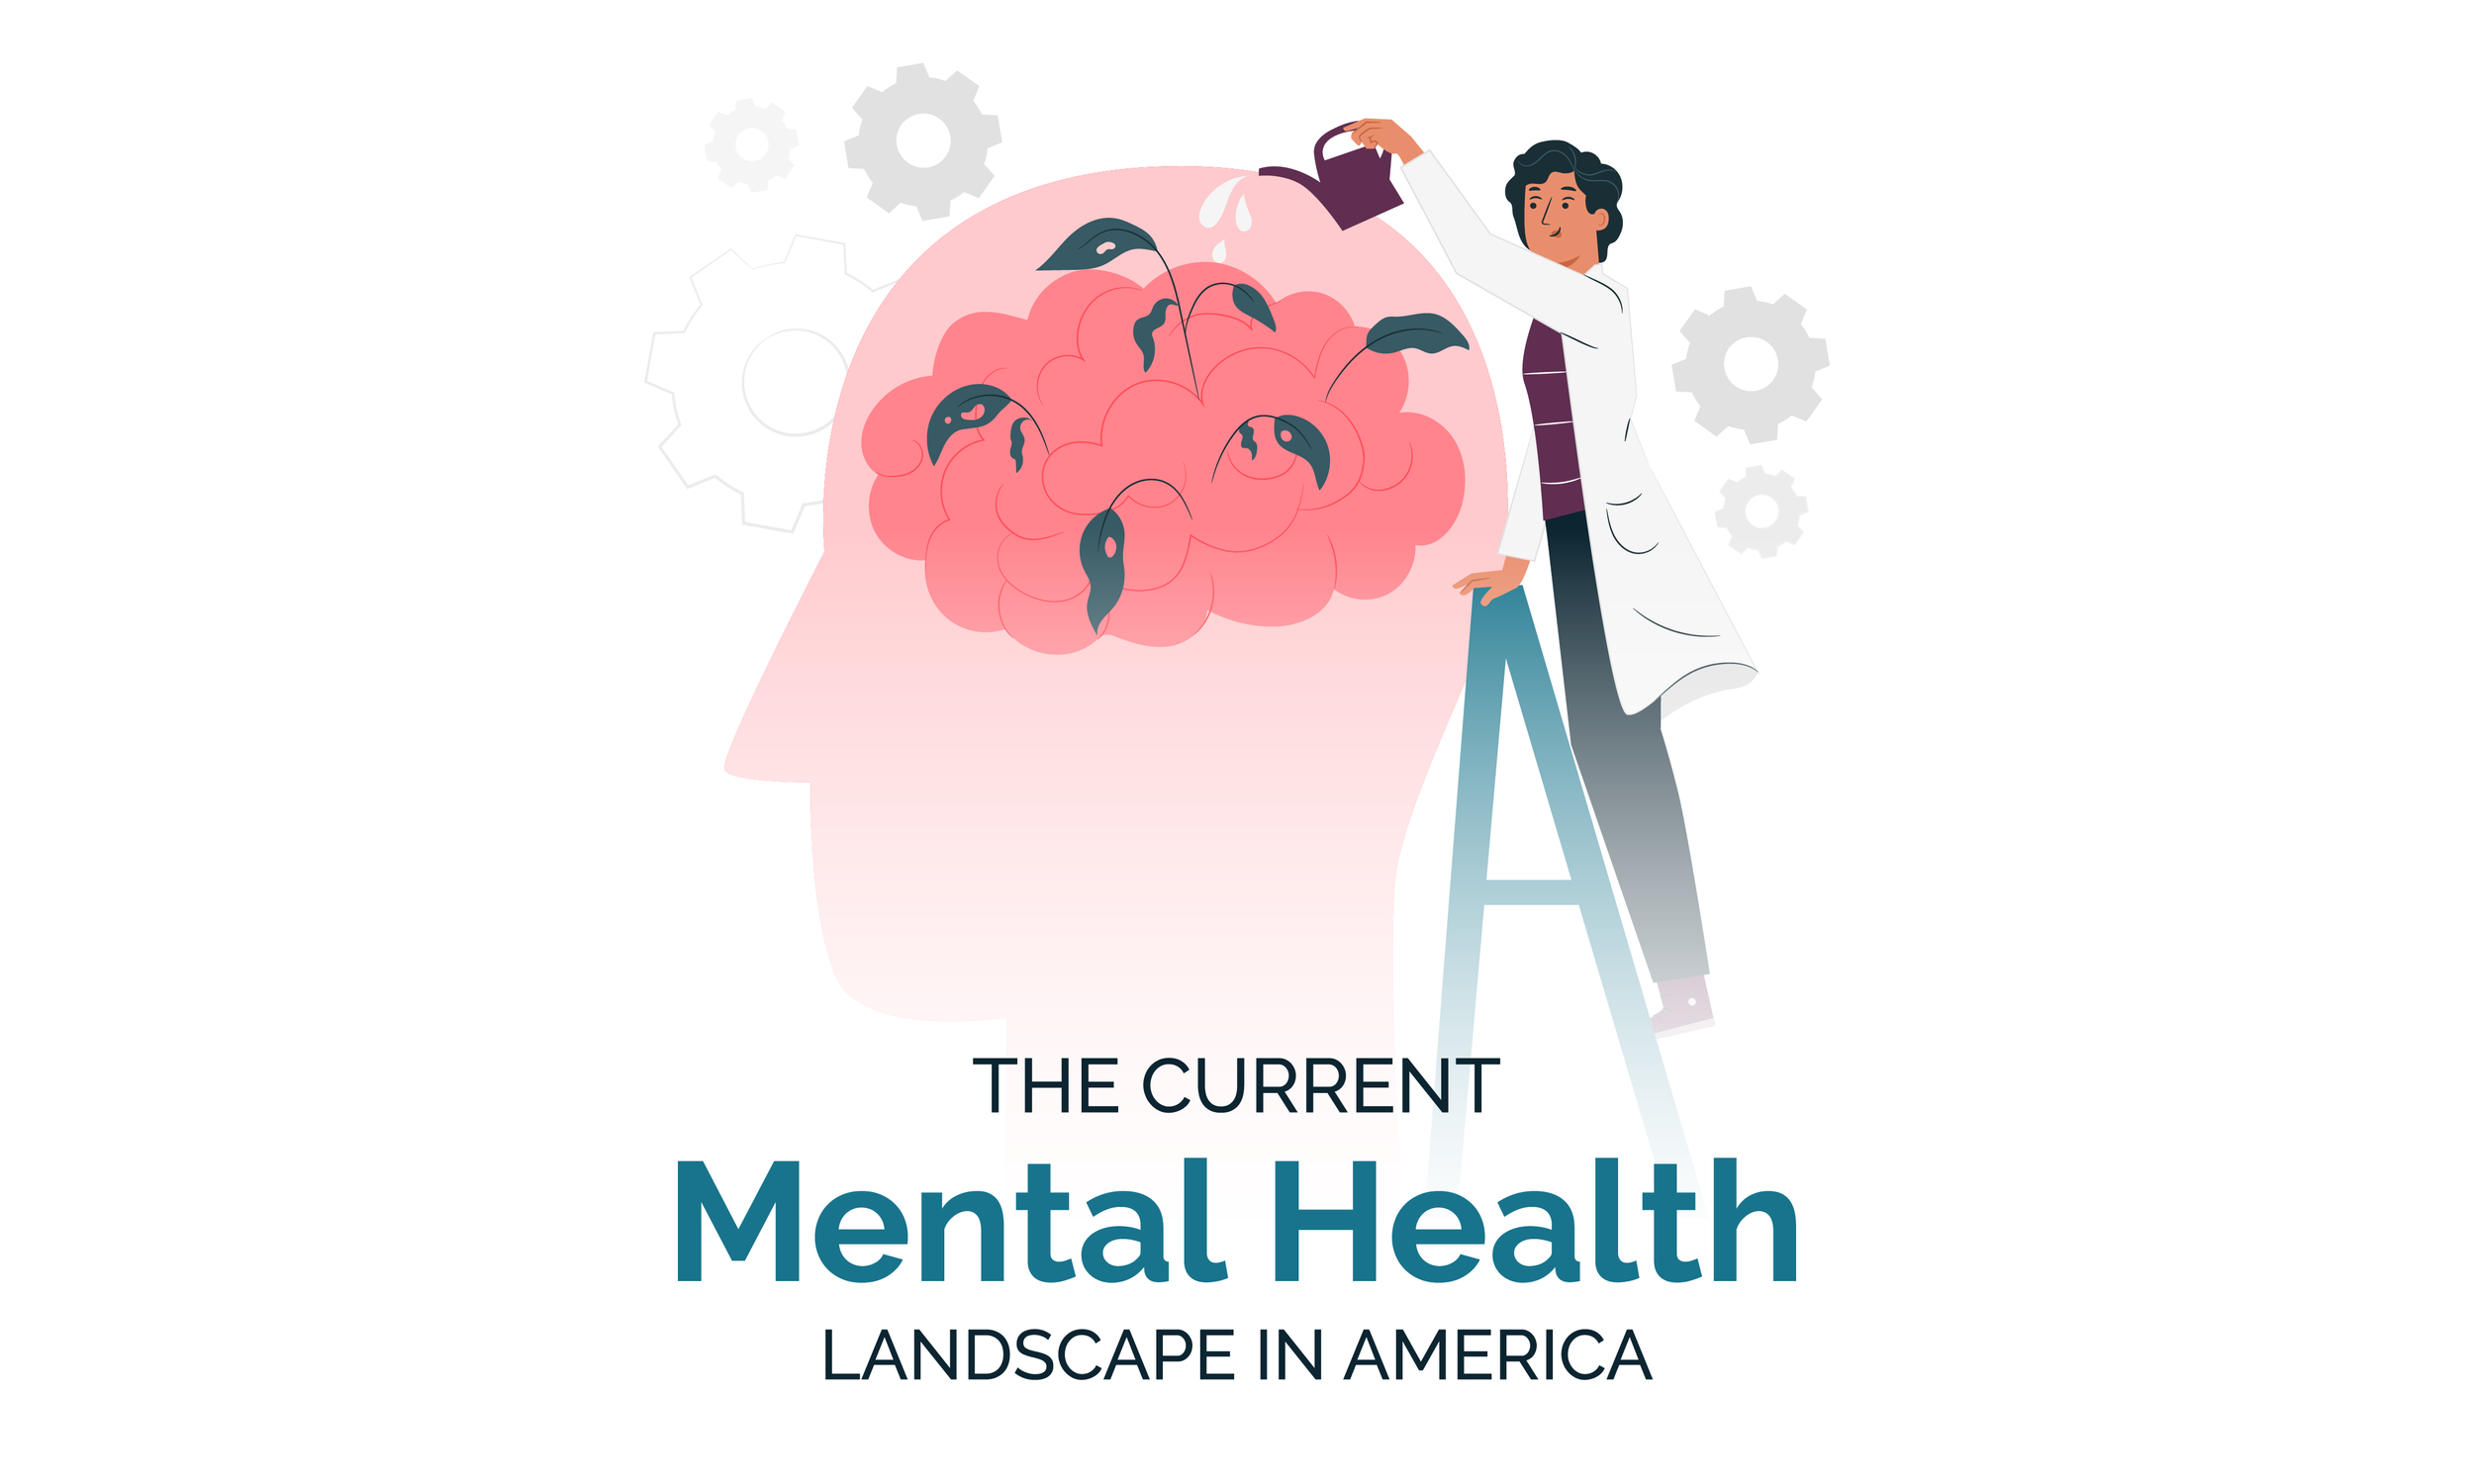 The Current Mental Health Landscape in America